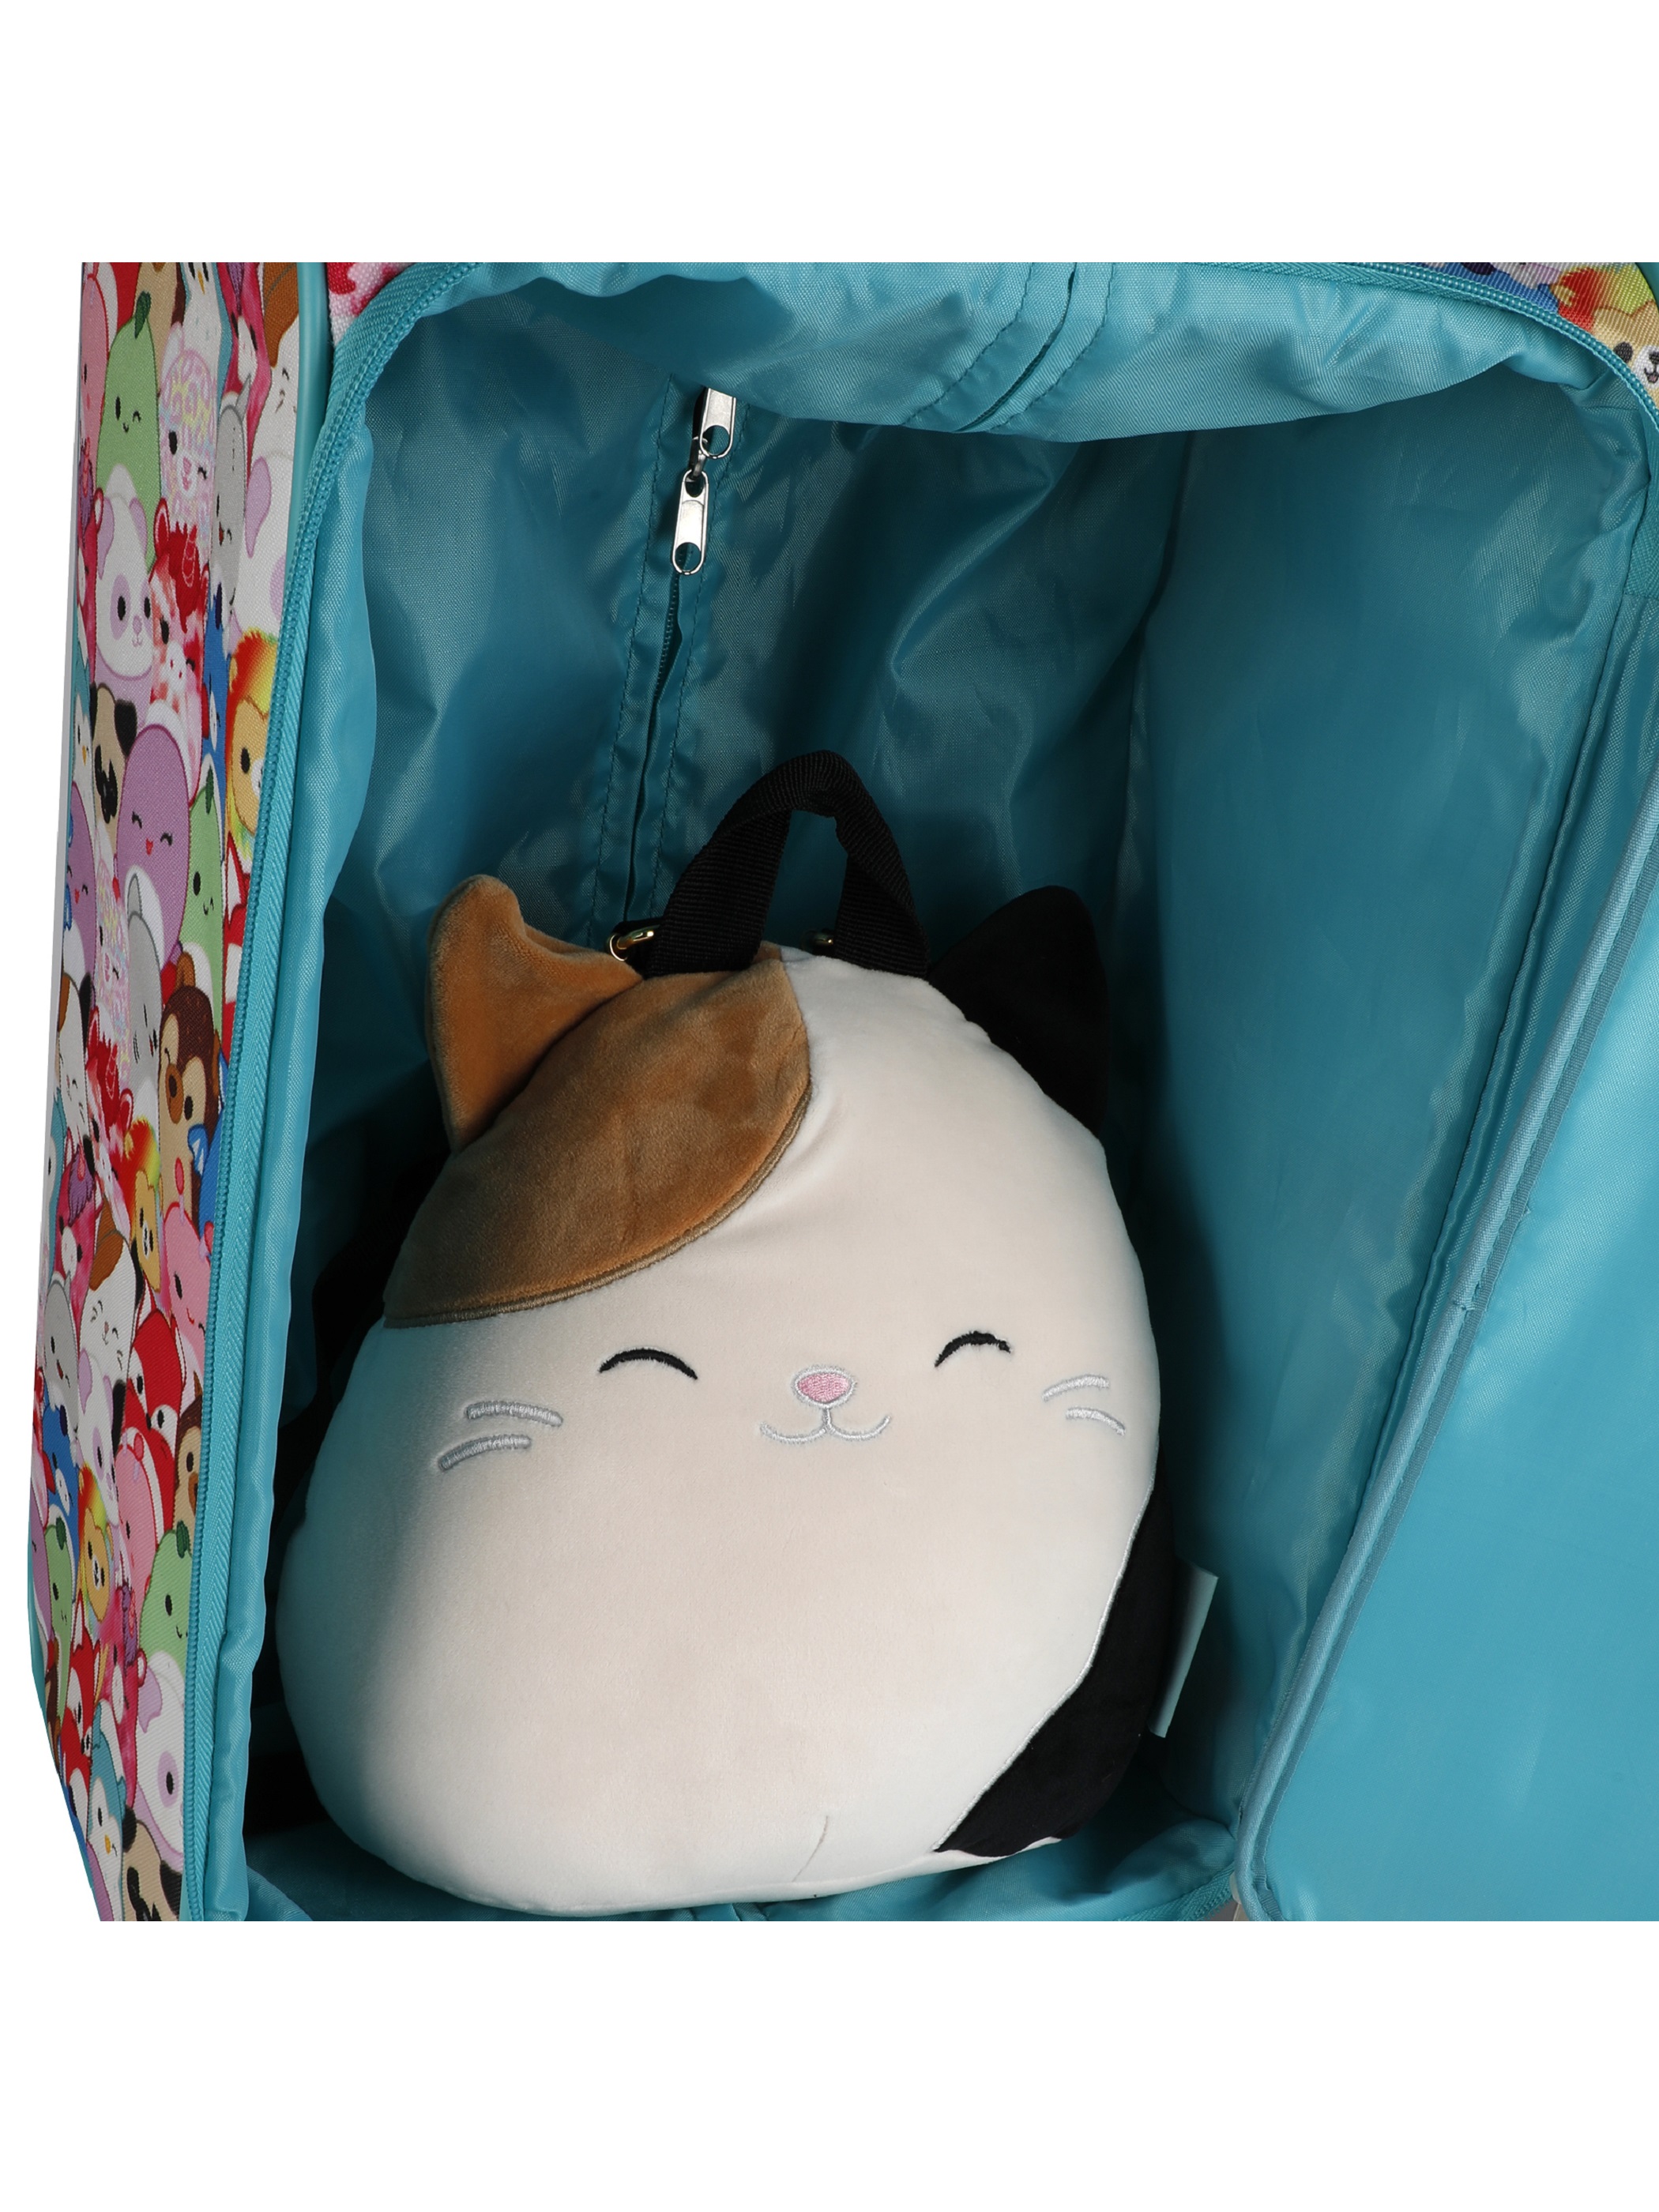 Squishmallows Cameron Cat 2pc  Travel Set with 18" Luggage and 10" Plush Backpack - image 6 of 9